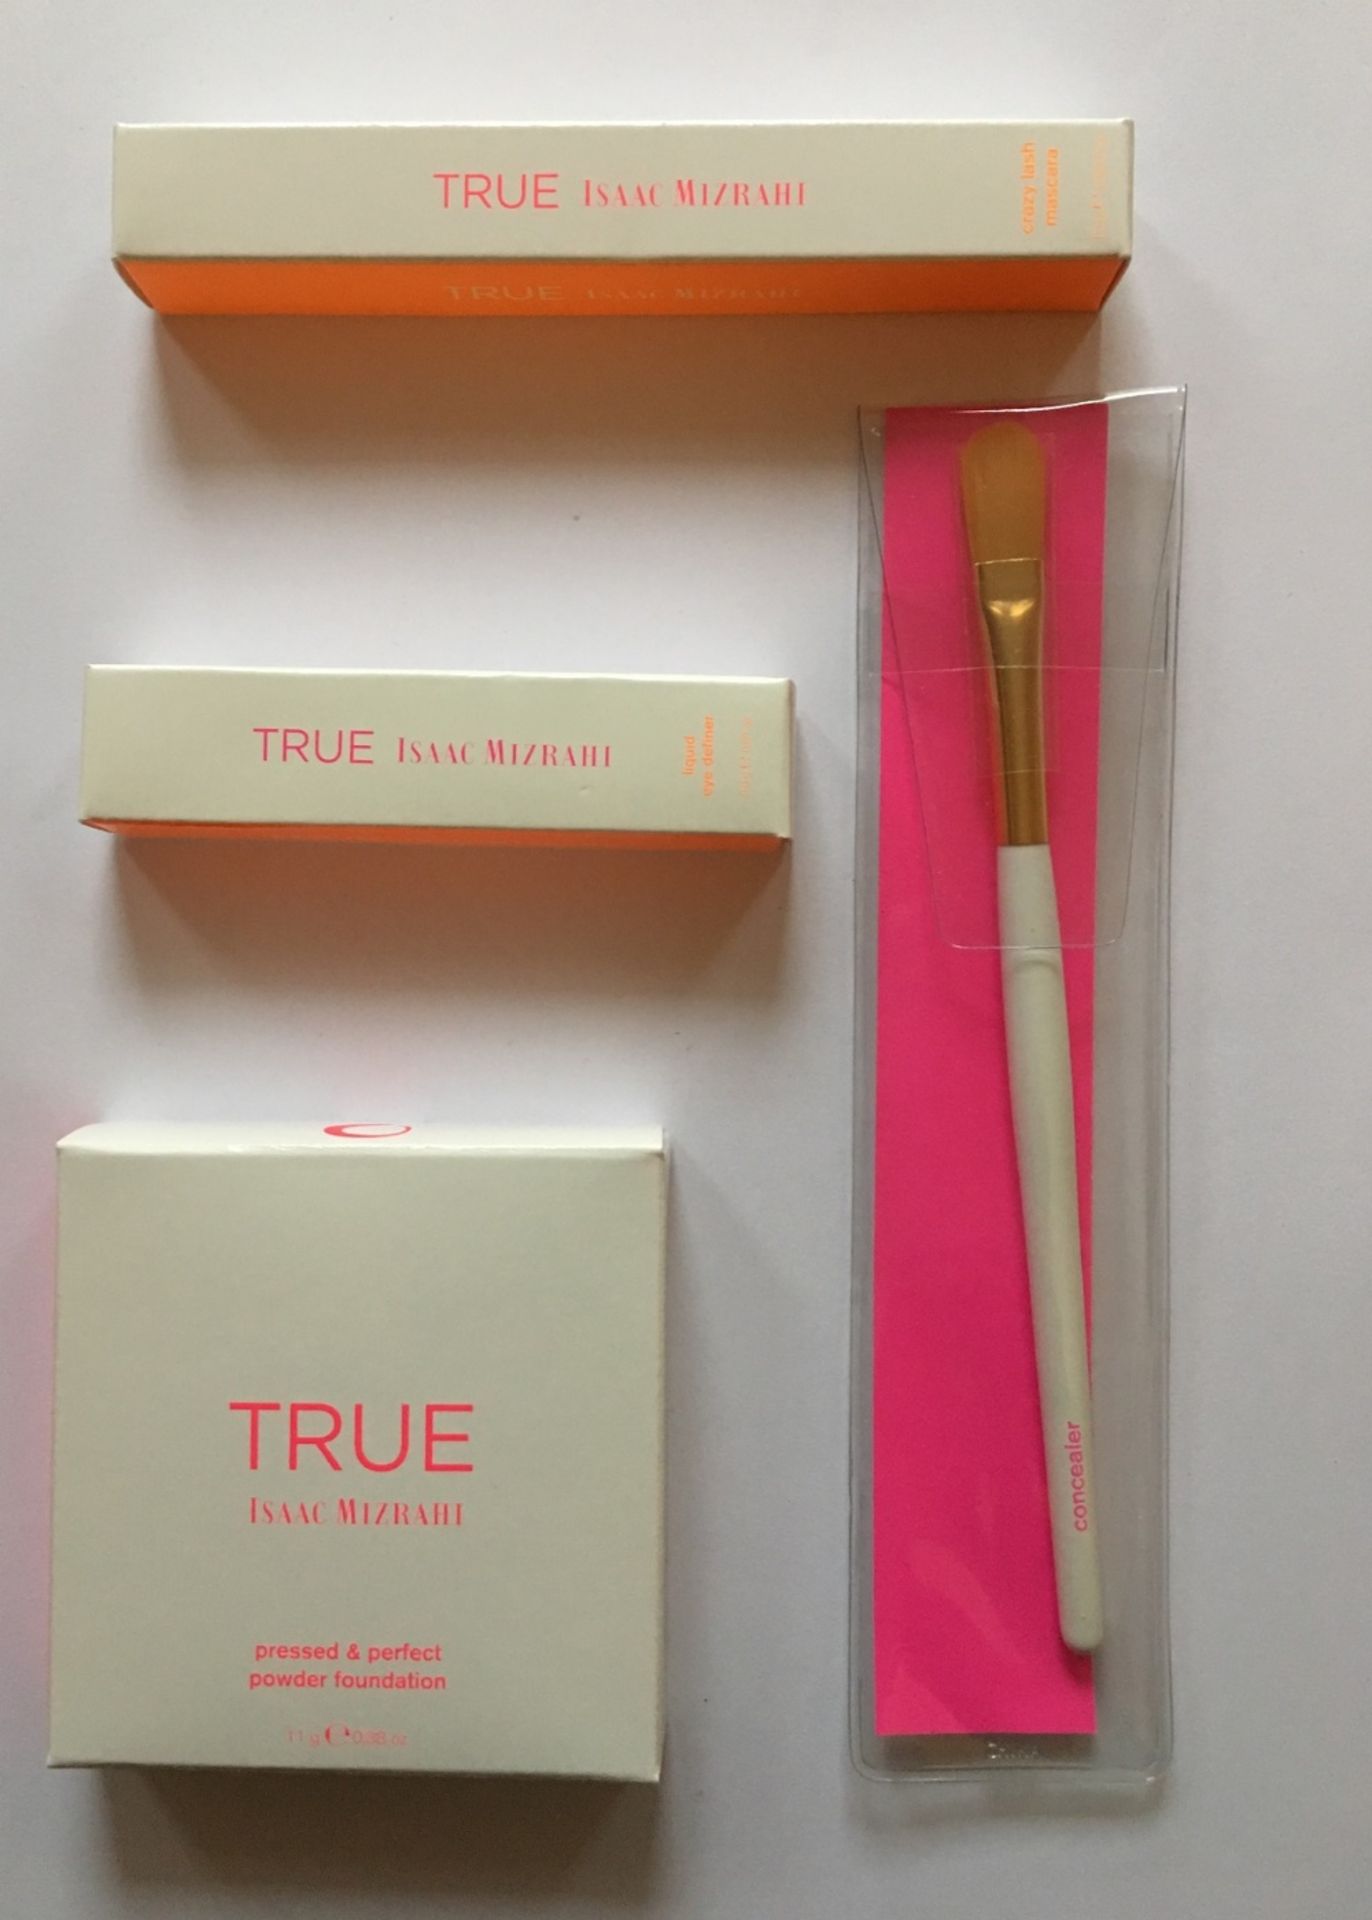 100 x True by issac Mizrahi 4 item gift set –6- Each set is individually packed in a padded envelope